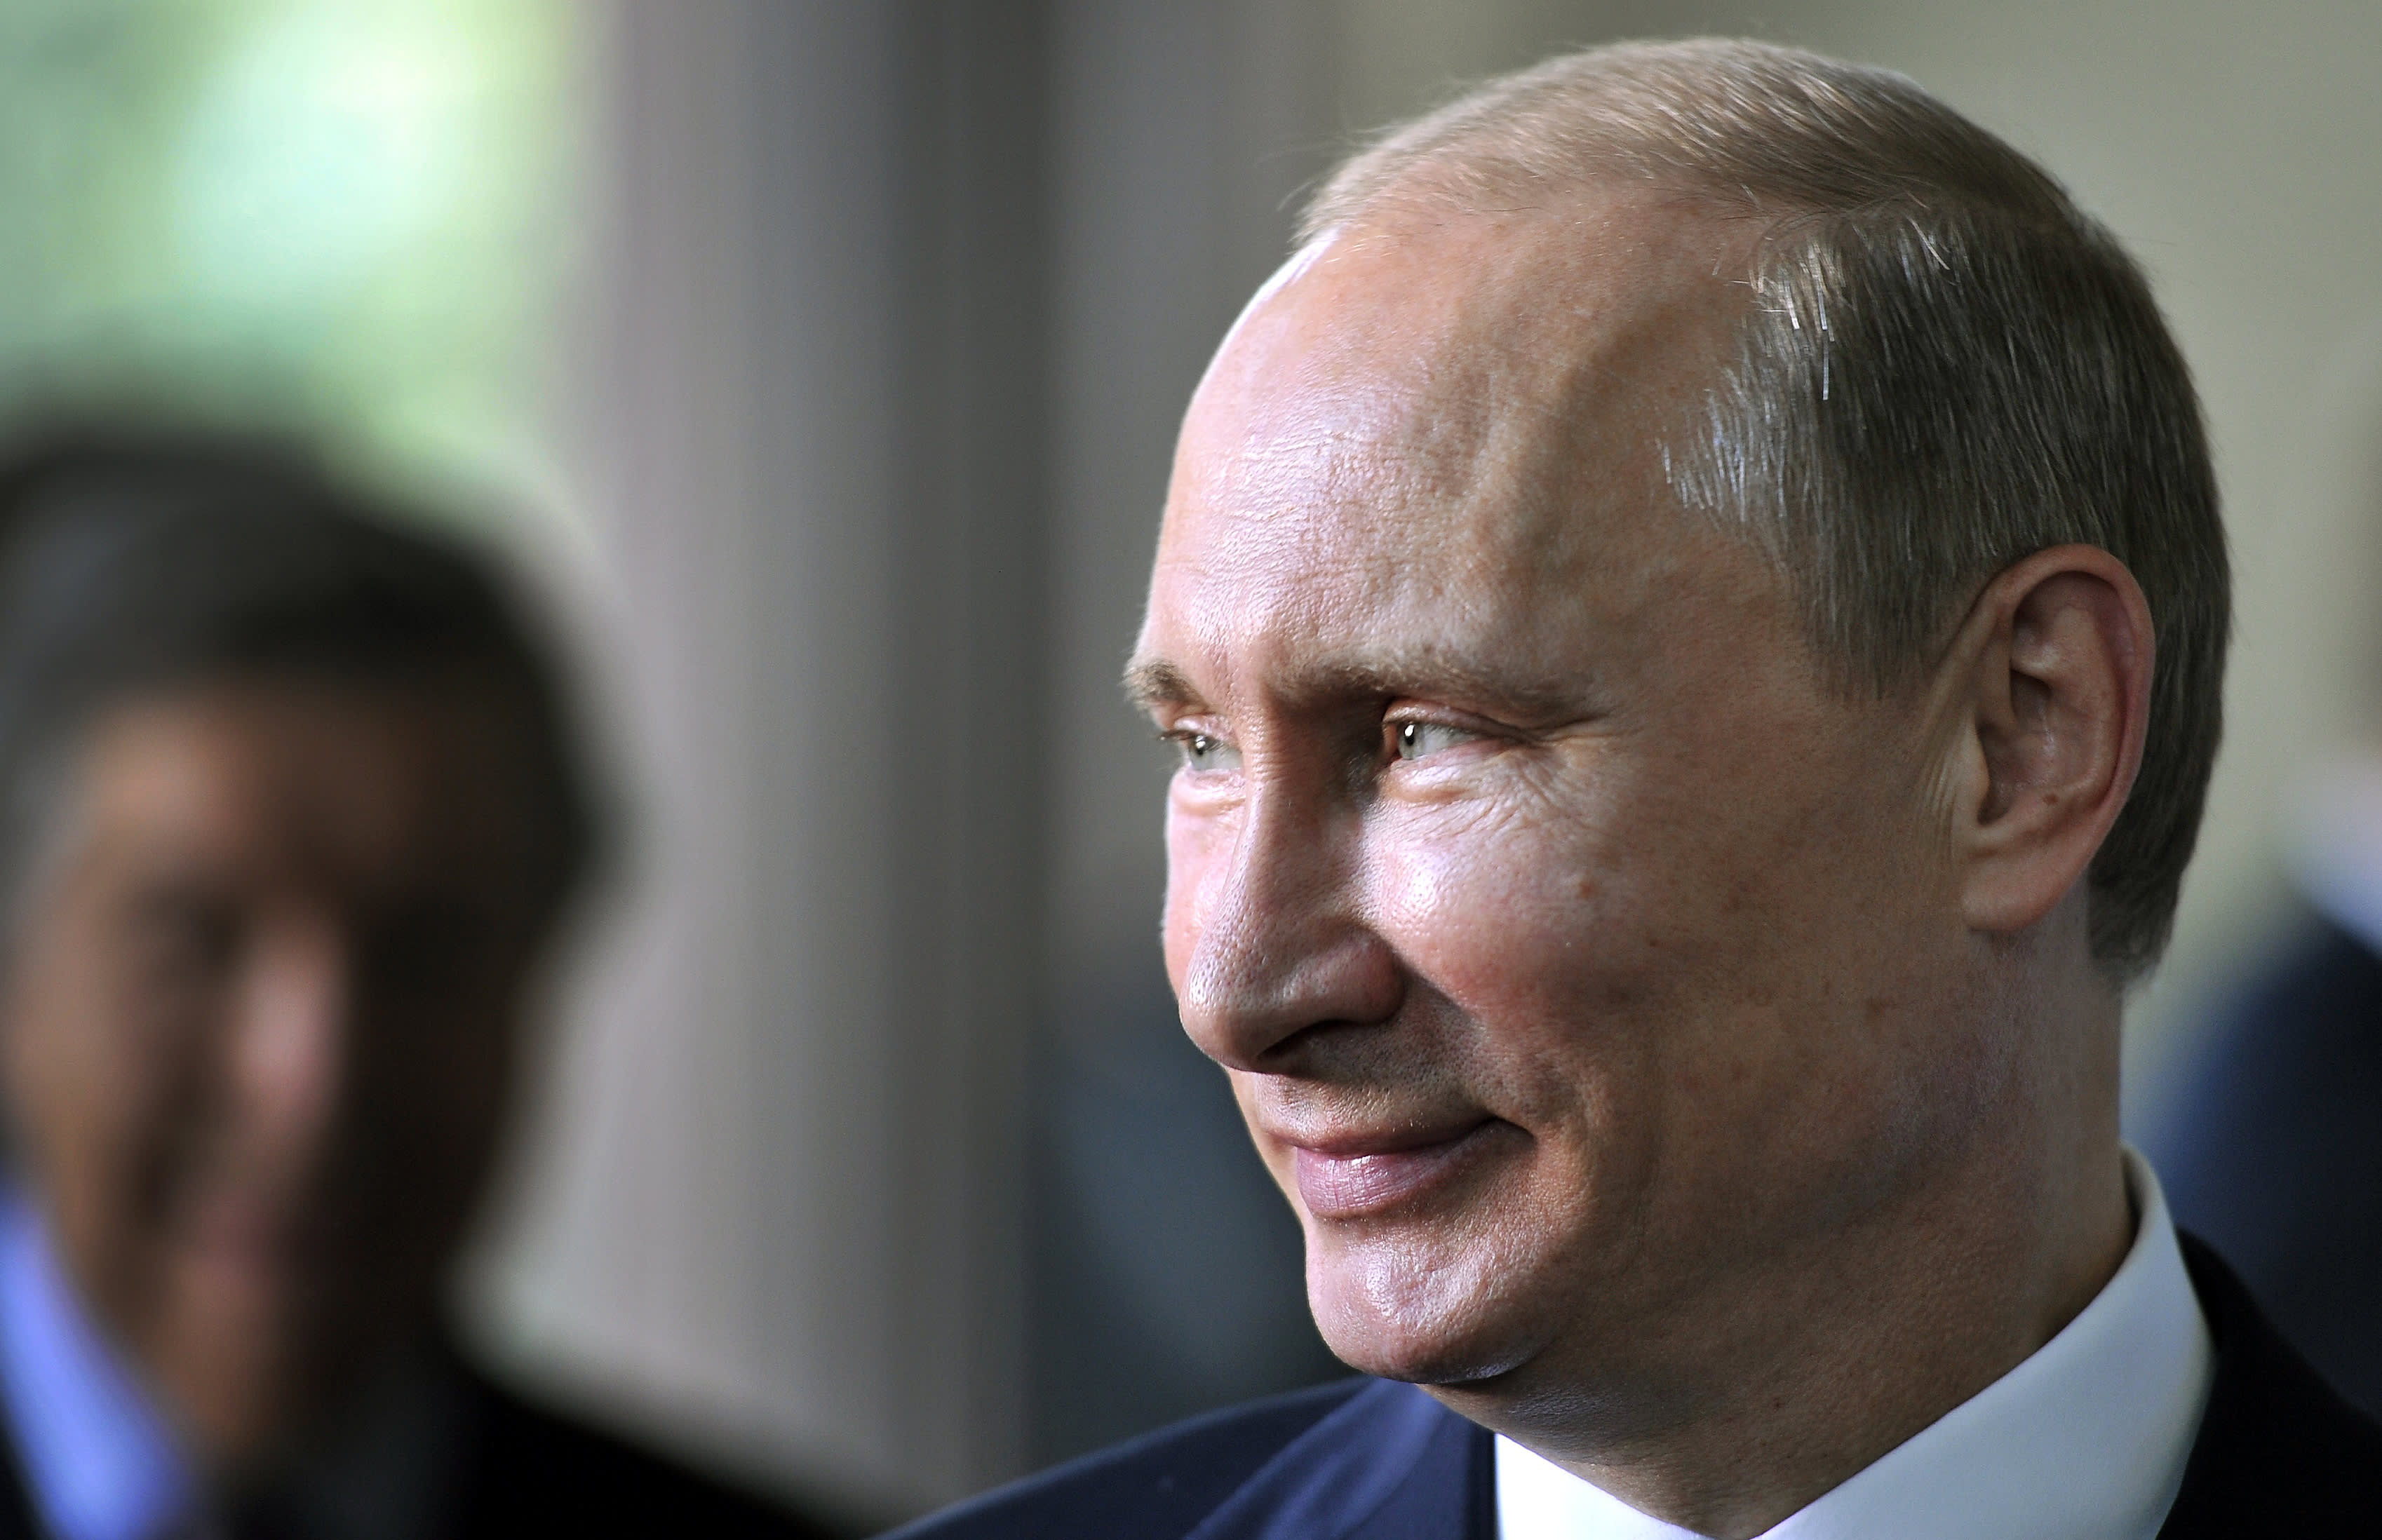 The world is worried Putin is about to invade Ukraine. Here’s why